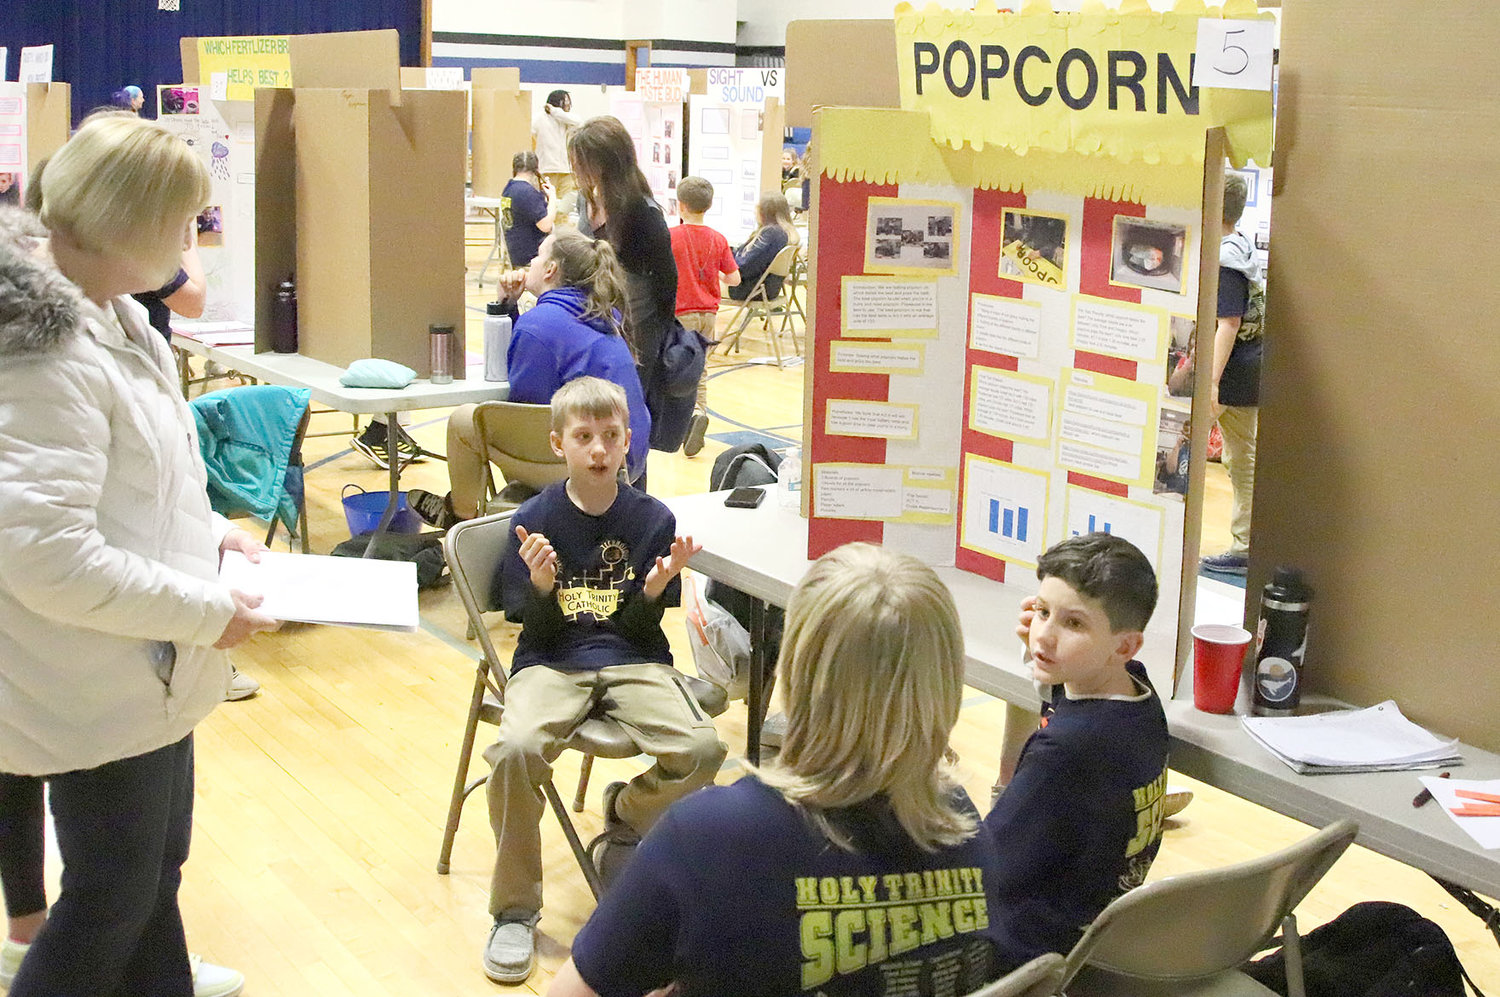 Nolan Peitz, Cooper Barnes, and Reid Schmitt talk about popcorn with a visitor who stopped by their science fair project display Wednesday night in West Point.